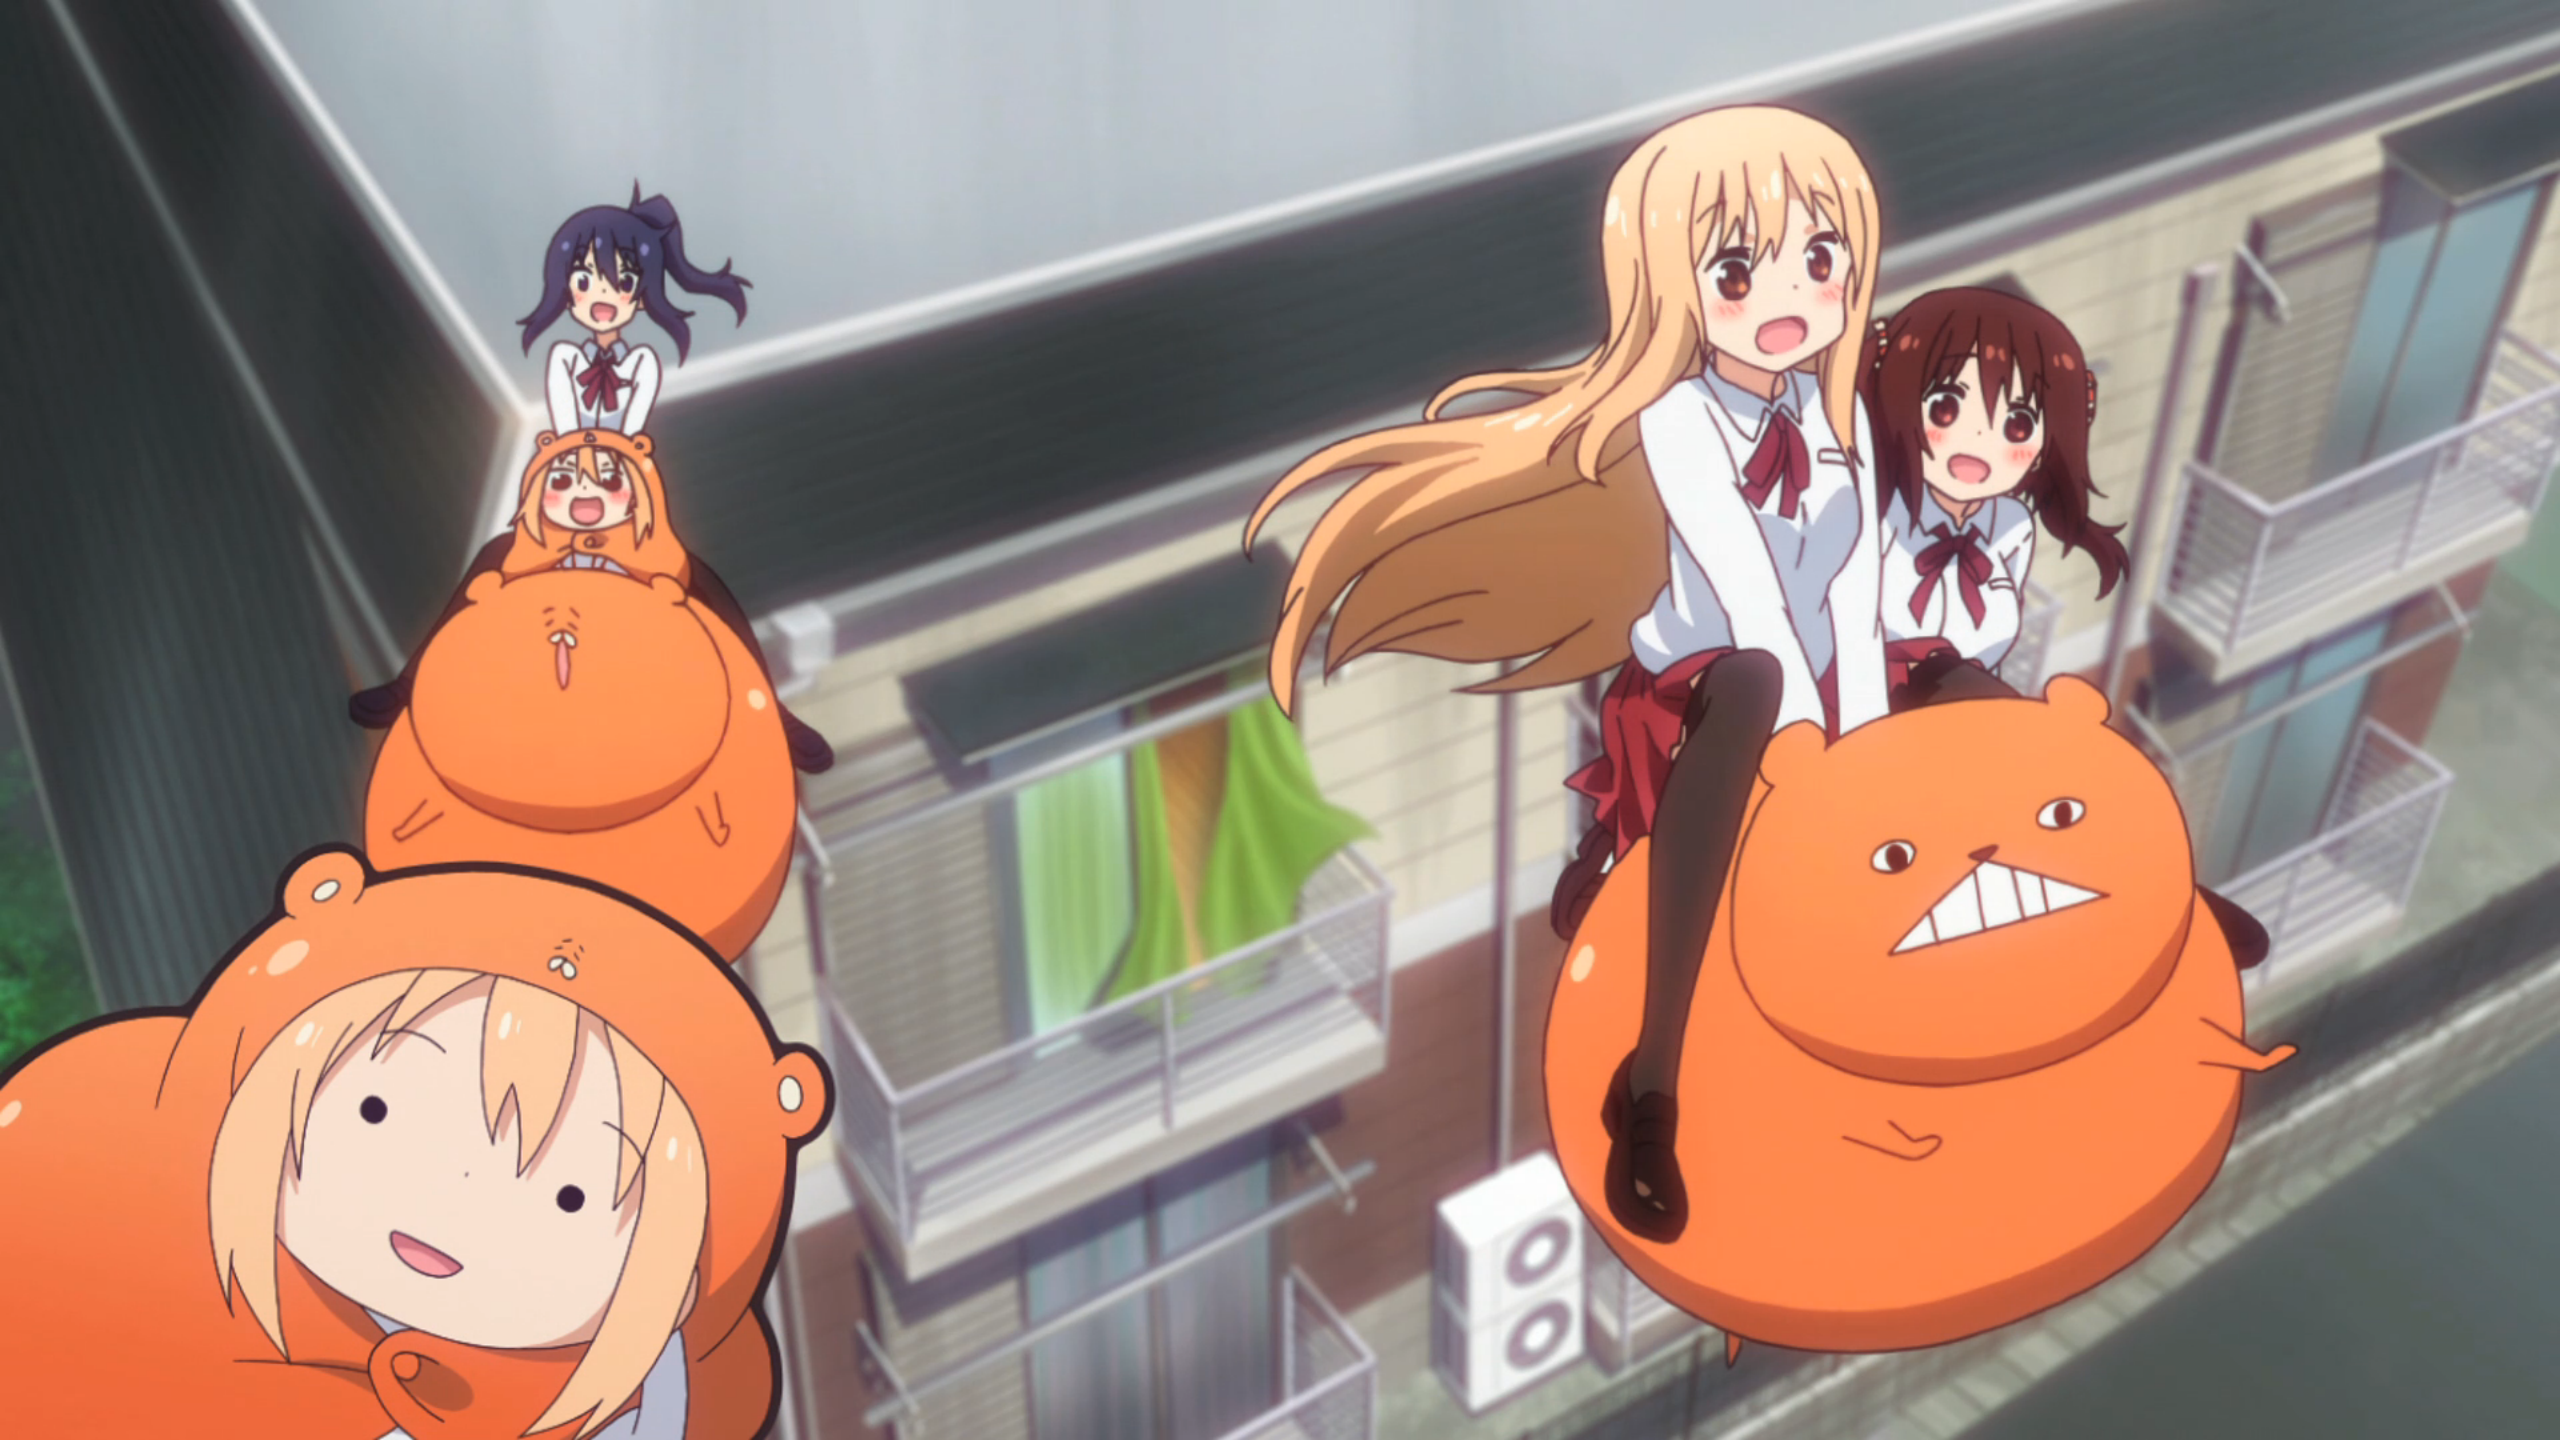 NOT EVEN THE INTERNS ARE SAFE FROM UMARU